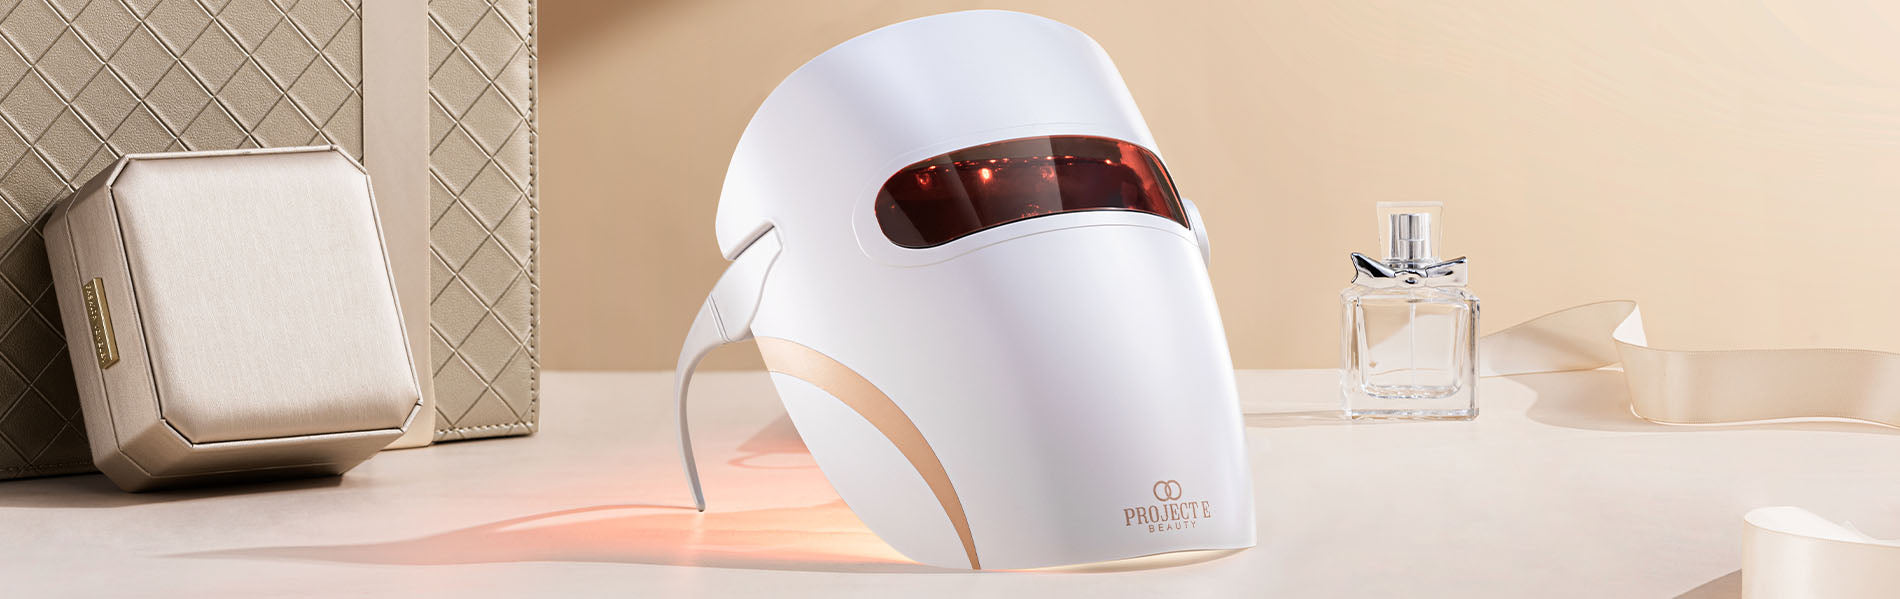 Can You Overdo Red LED Light Therapy?